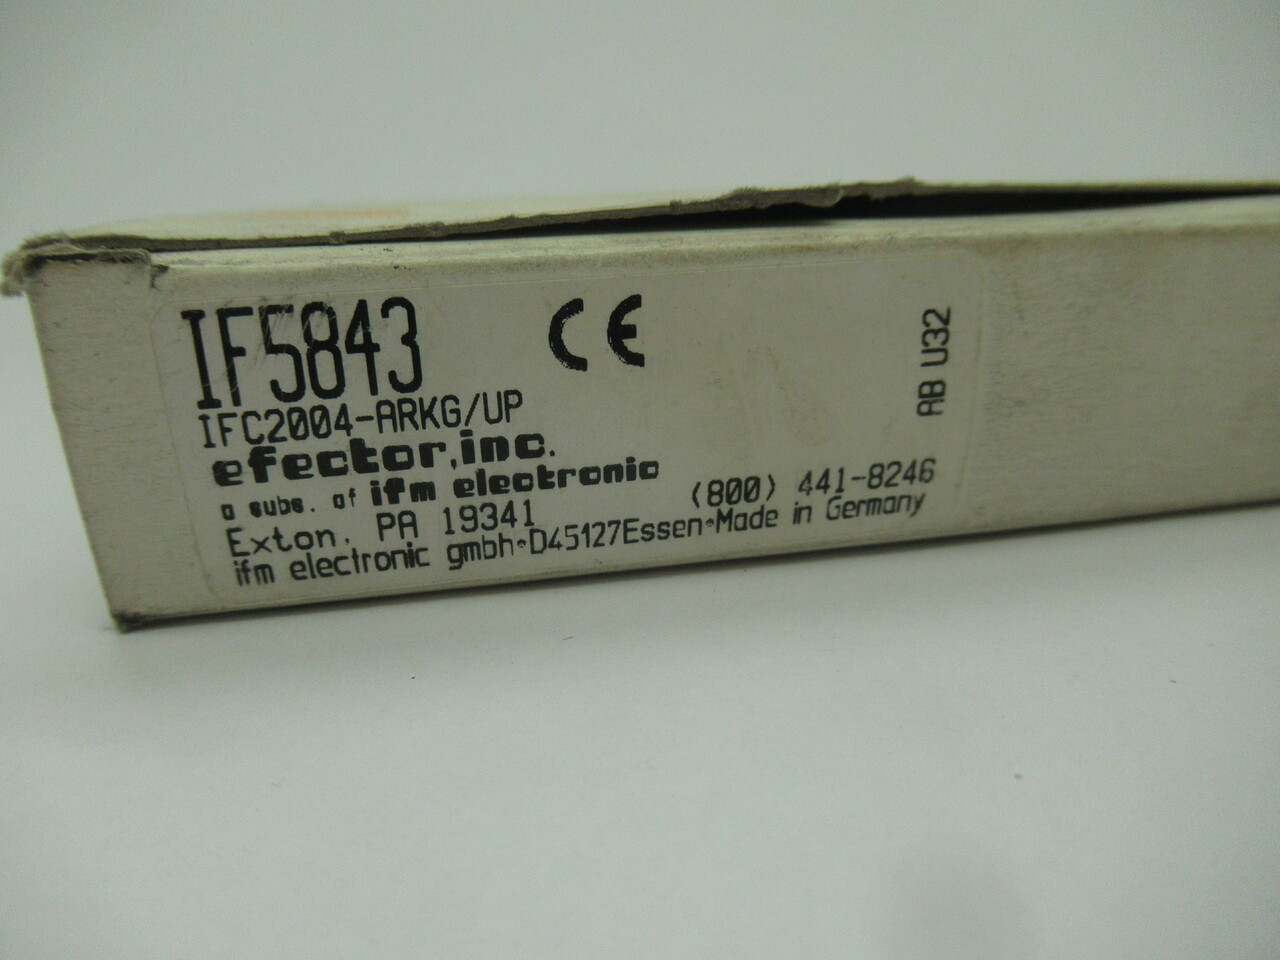 IFM IFC2004-ARKG/UP Inductive Sensor 150mA 10-36VDC 4mm Cable 2m IF5843 NEW